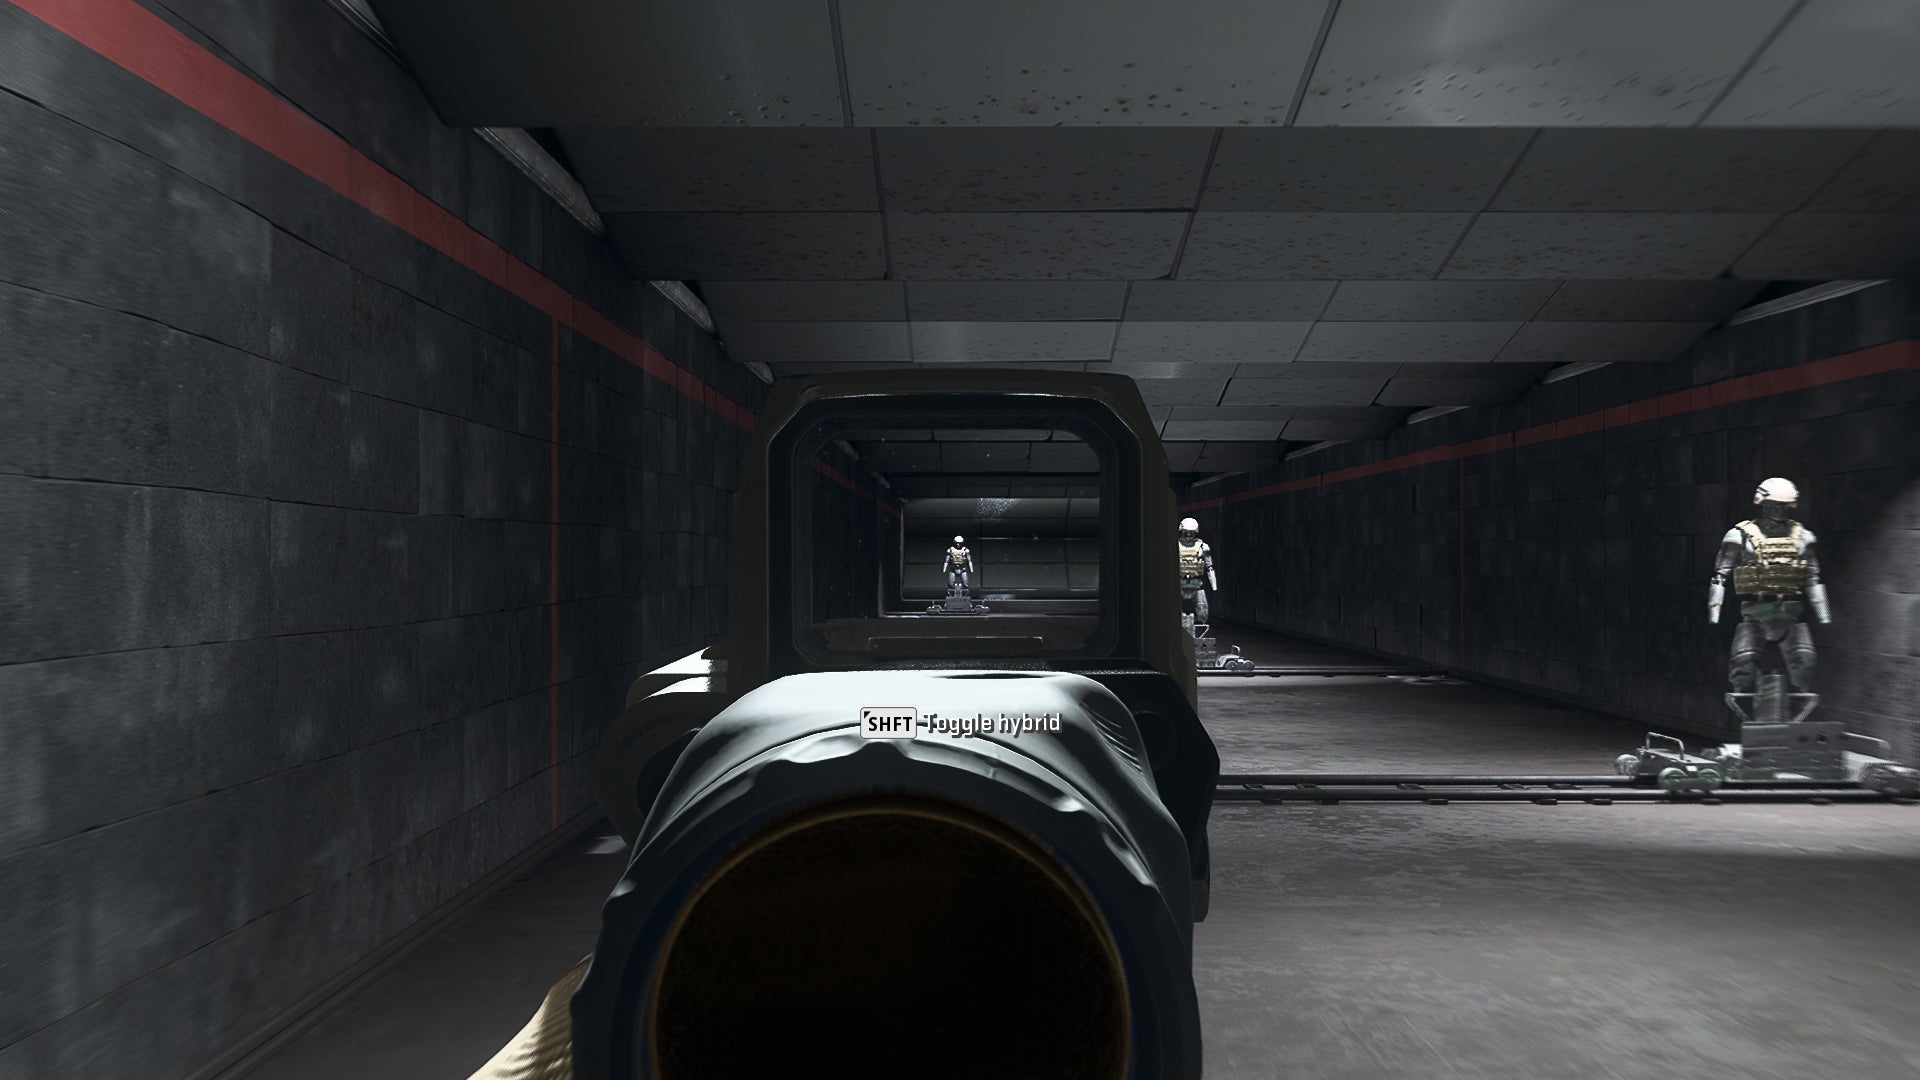 The player in Warzone 2.0 aims at a training dummy using the Therm Optic x9 optic attachment.